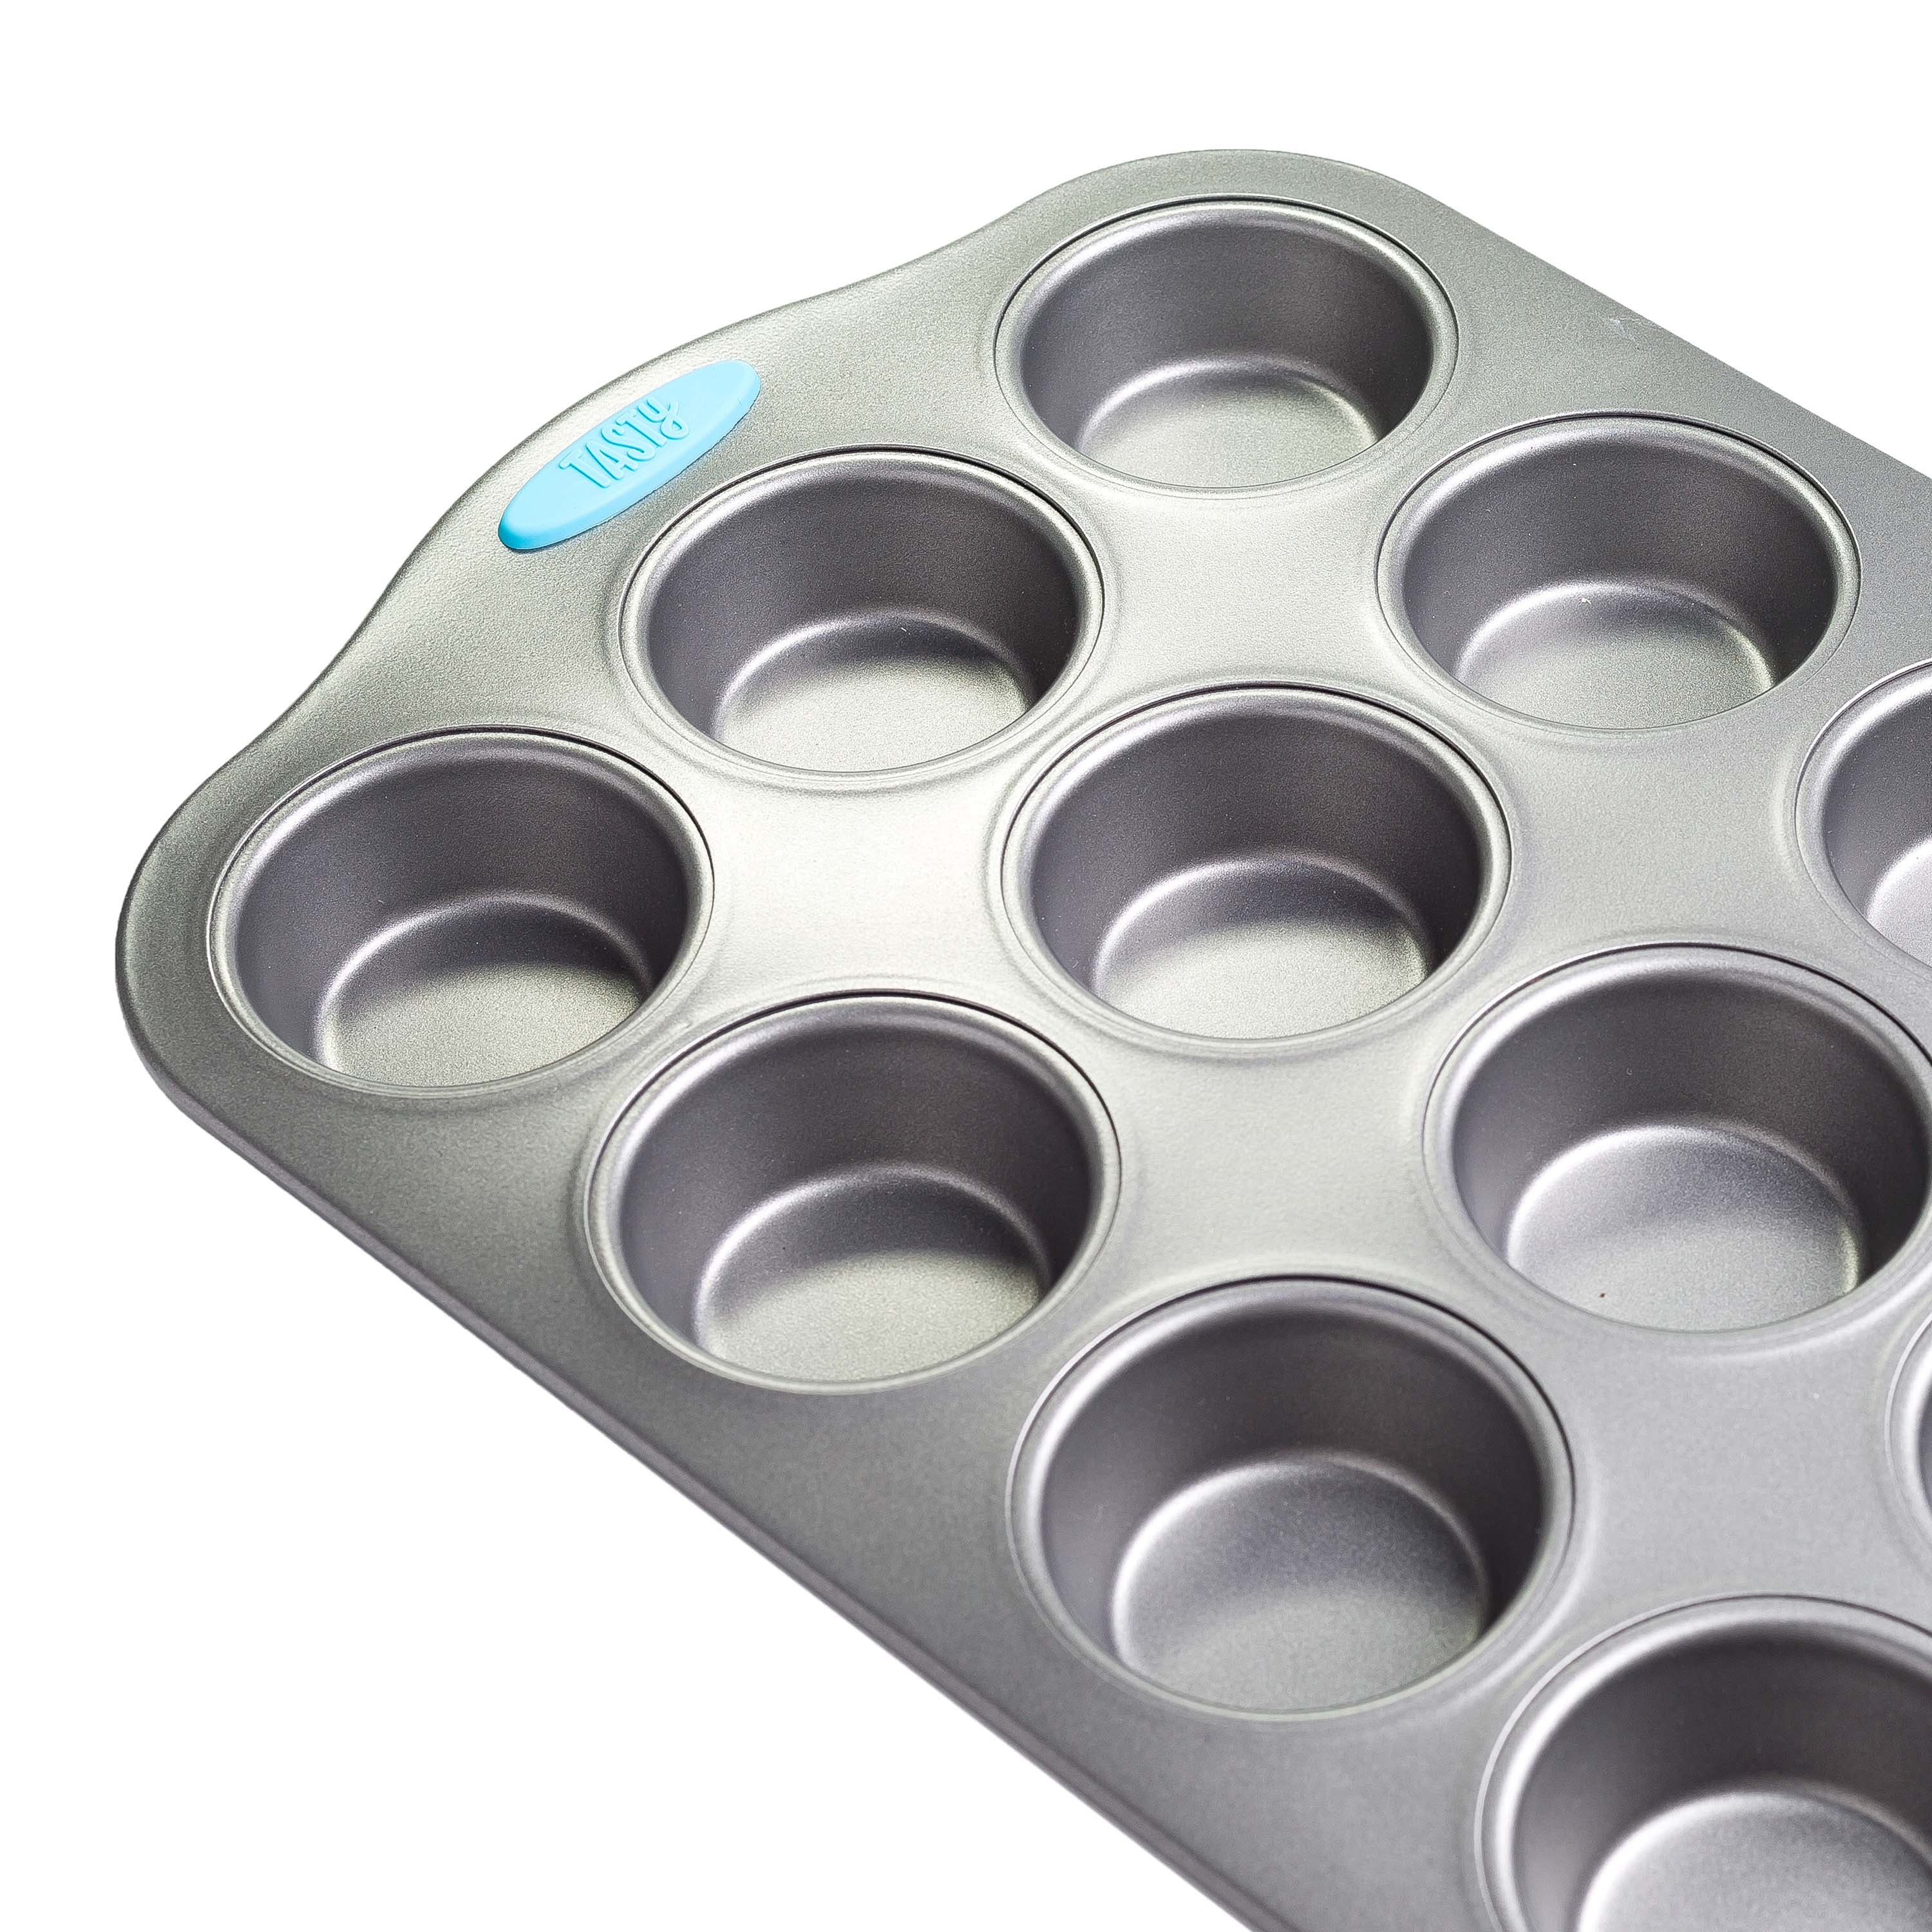 Food Network™ Textured Performance Series 12-Cup Nonstick Muffin Pan